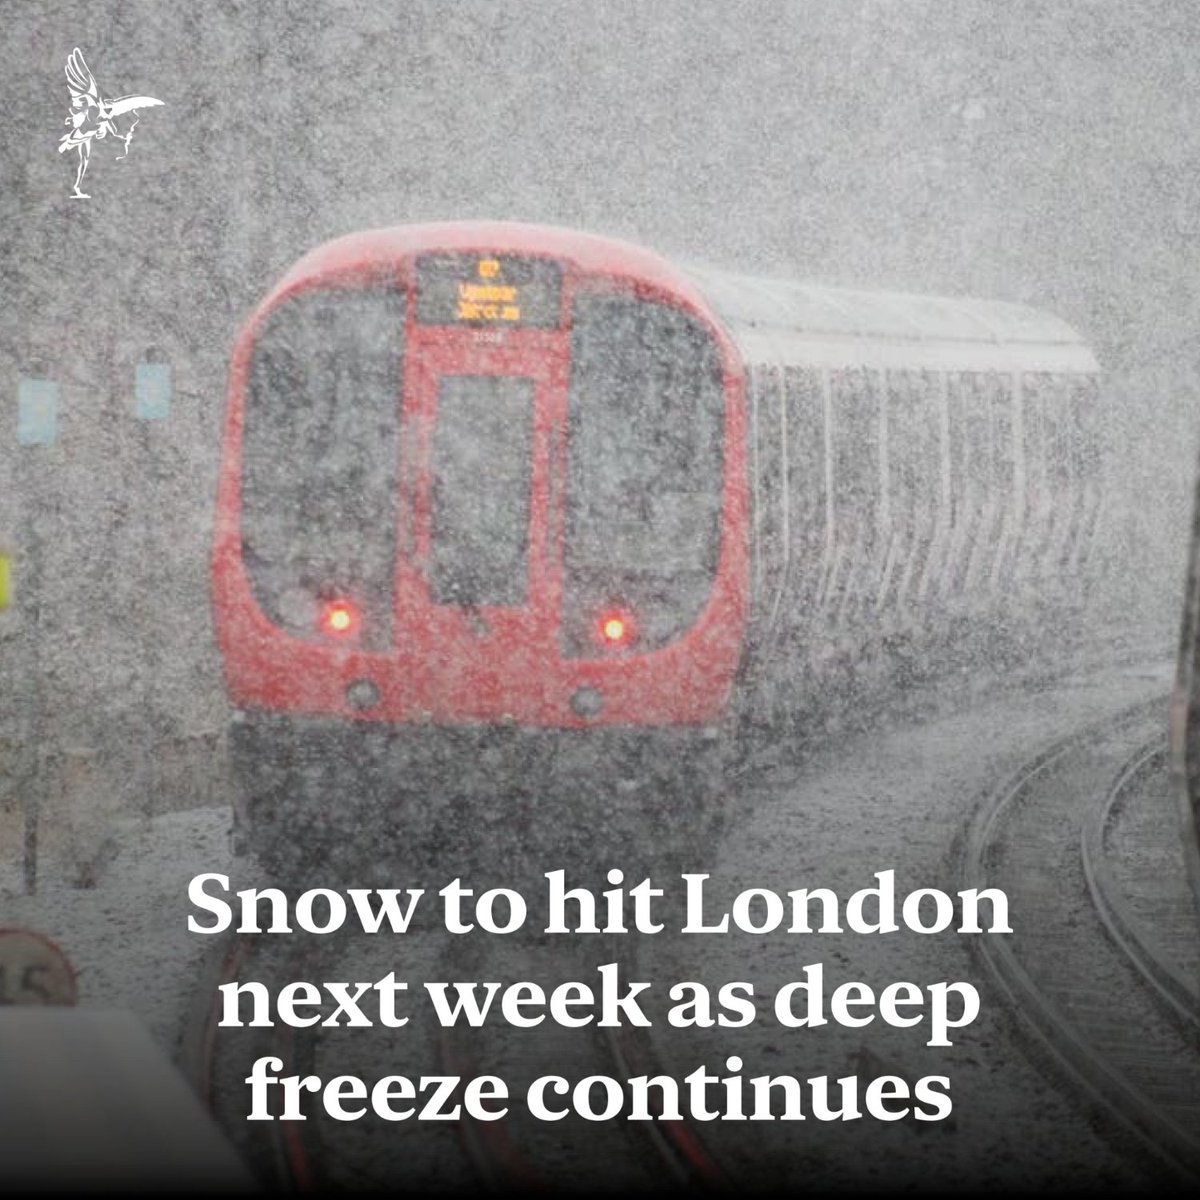 Brr! London is set to be hit by more snow next week - with temperatures due to plummet even further ☃️ Find out if you're likely see snowfall: standard.co.uk/news/london/sn…